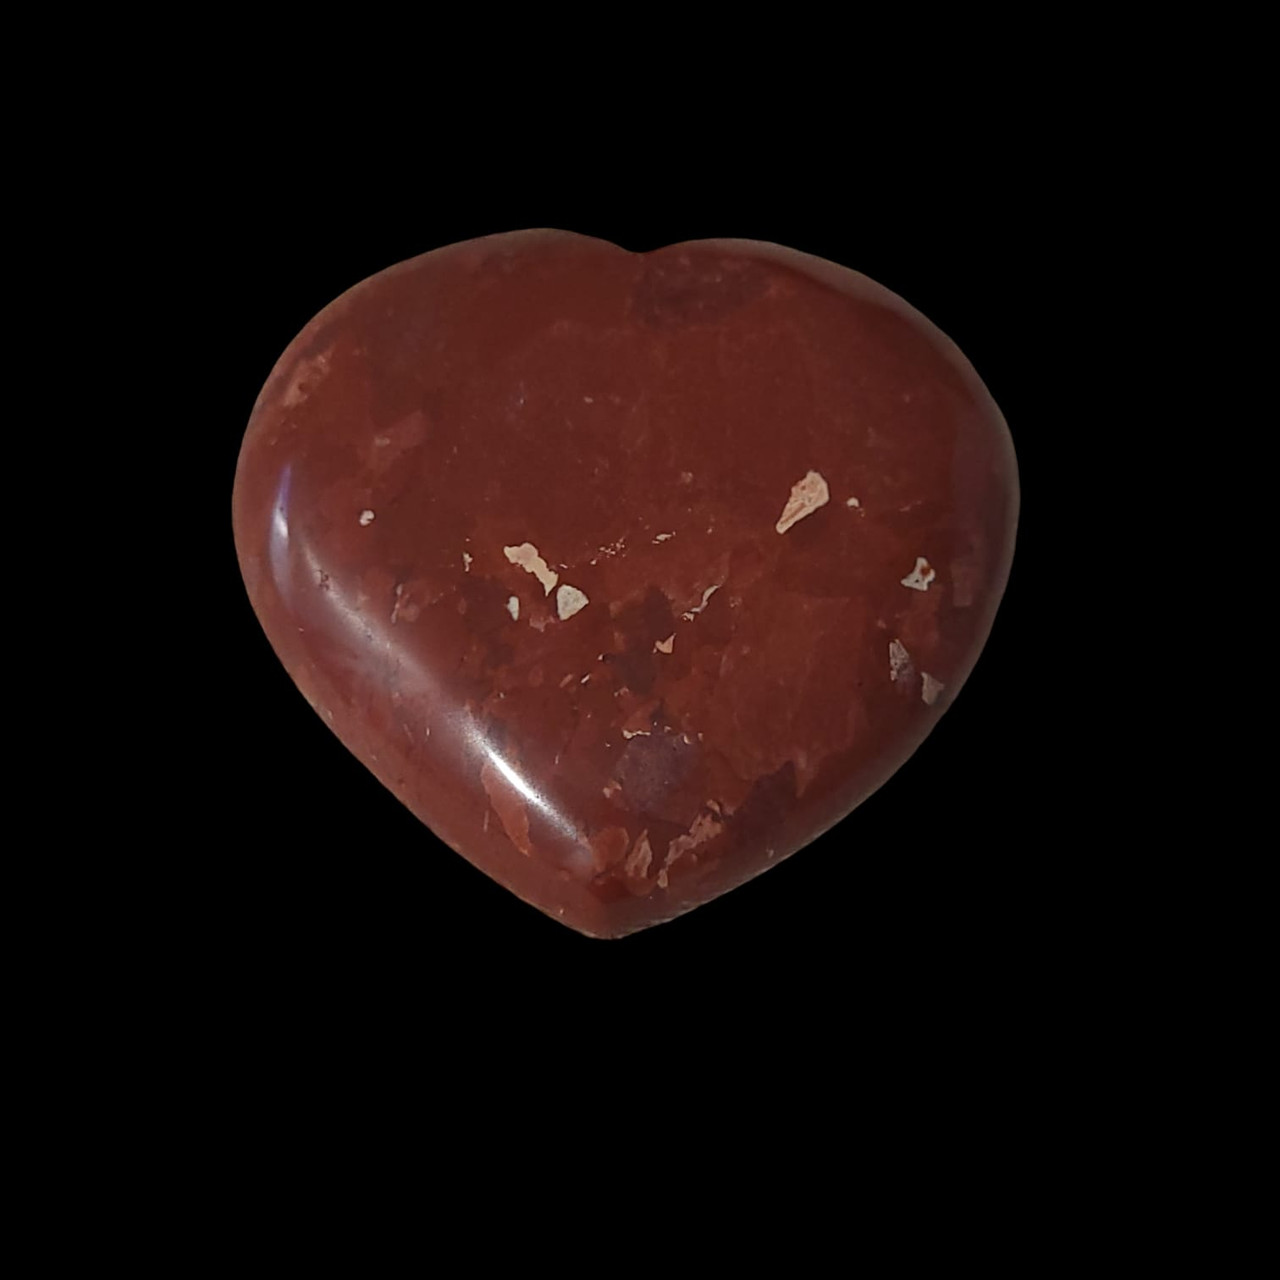 Explore Gaea Rare's Red Jasper Heart—a striking creation carved from red jasper, a microcrystalline variety of quartz known for its distinctive reddish hue. Unveil the geological beauty of red jasper, composed mainly of silicon dioxide with its rich color derived from iron oxide.